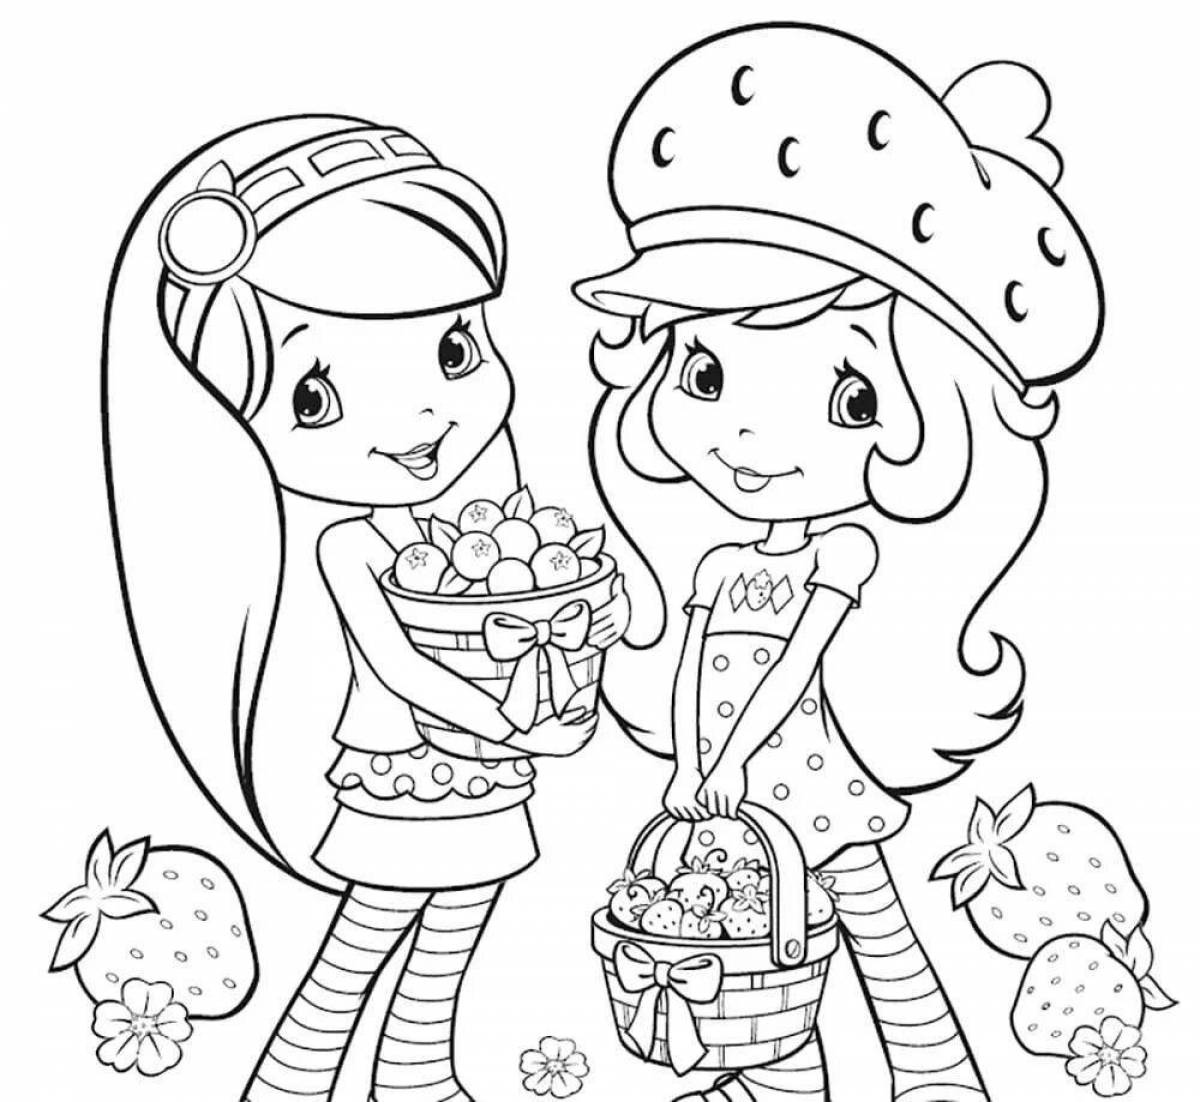 Coloring pages for girls 6-7 years old